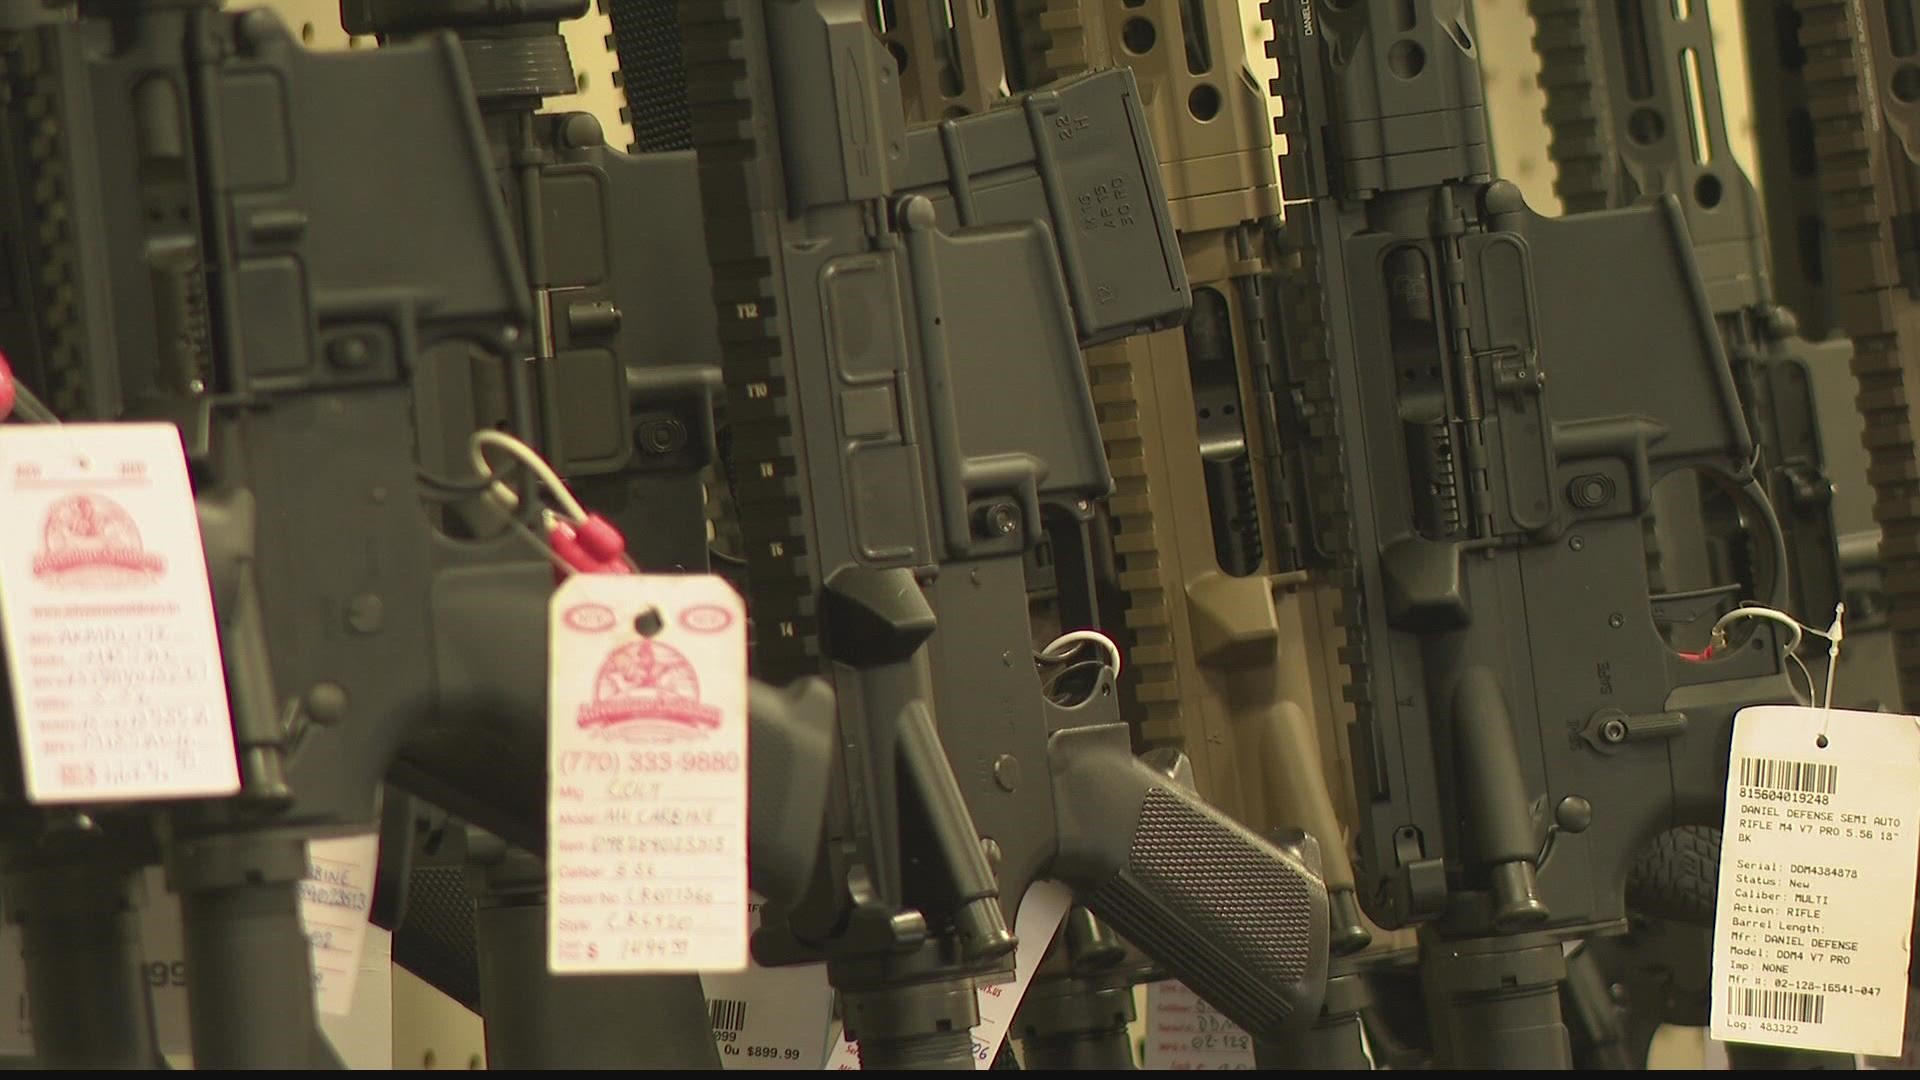 AR-15 bans have dominated discussions about gun sale restrictions in light of their use in recent mass shootings across the country.